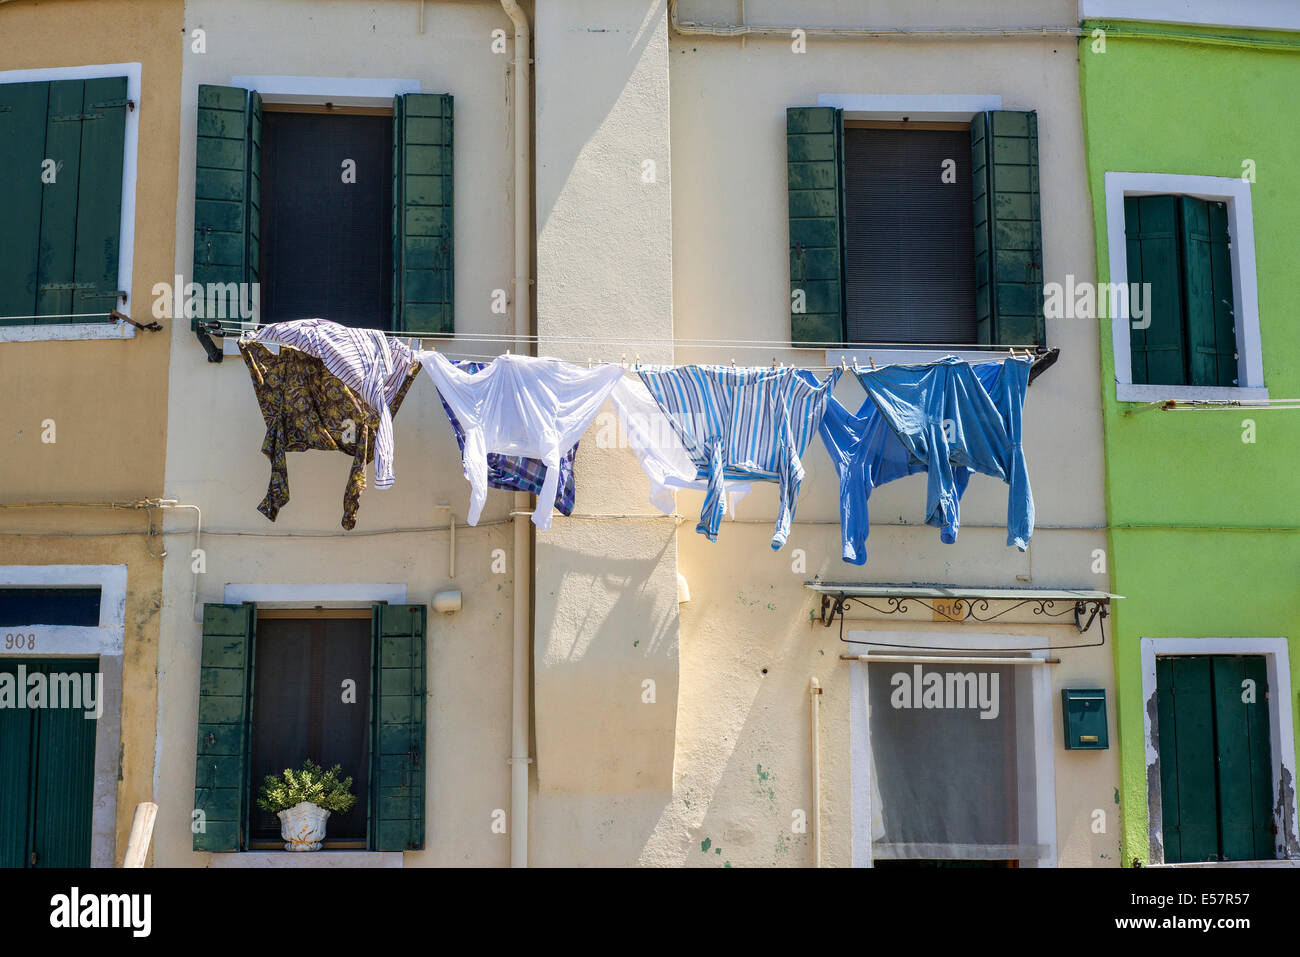 Laundry at the window in Burano Stock Photo